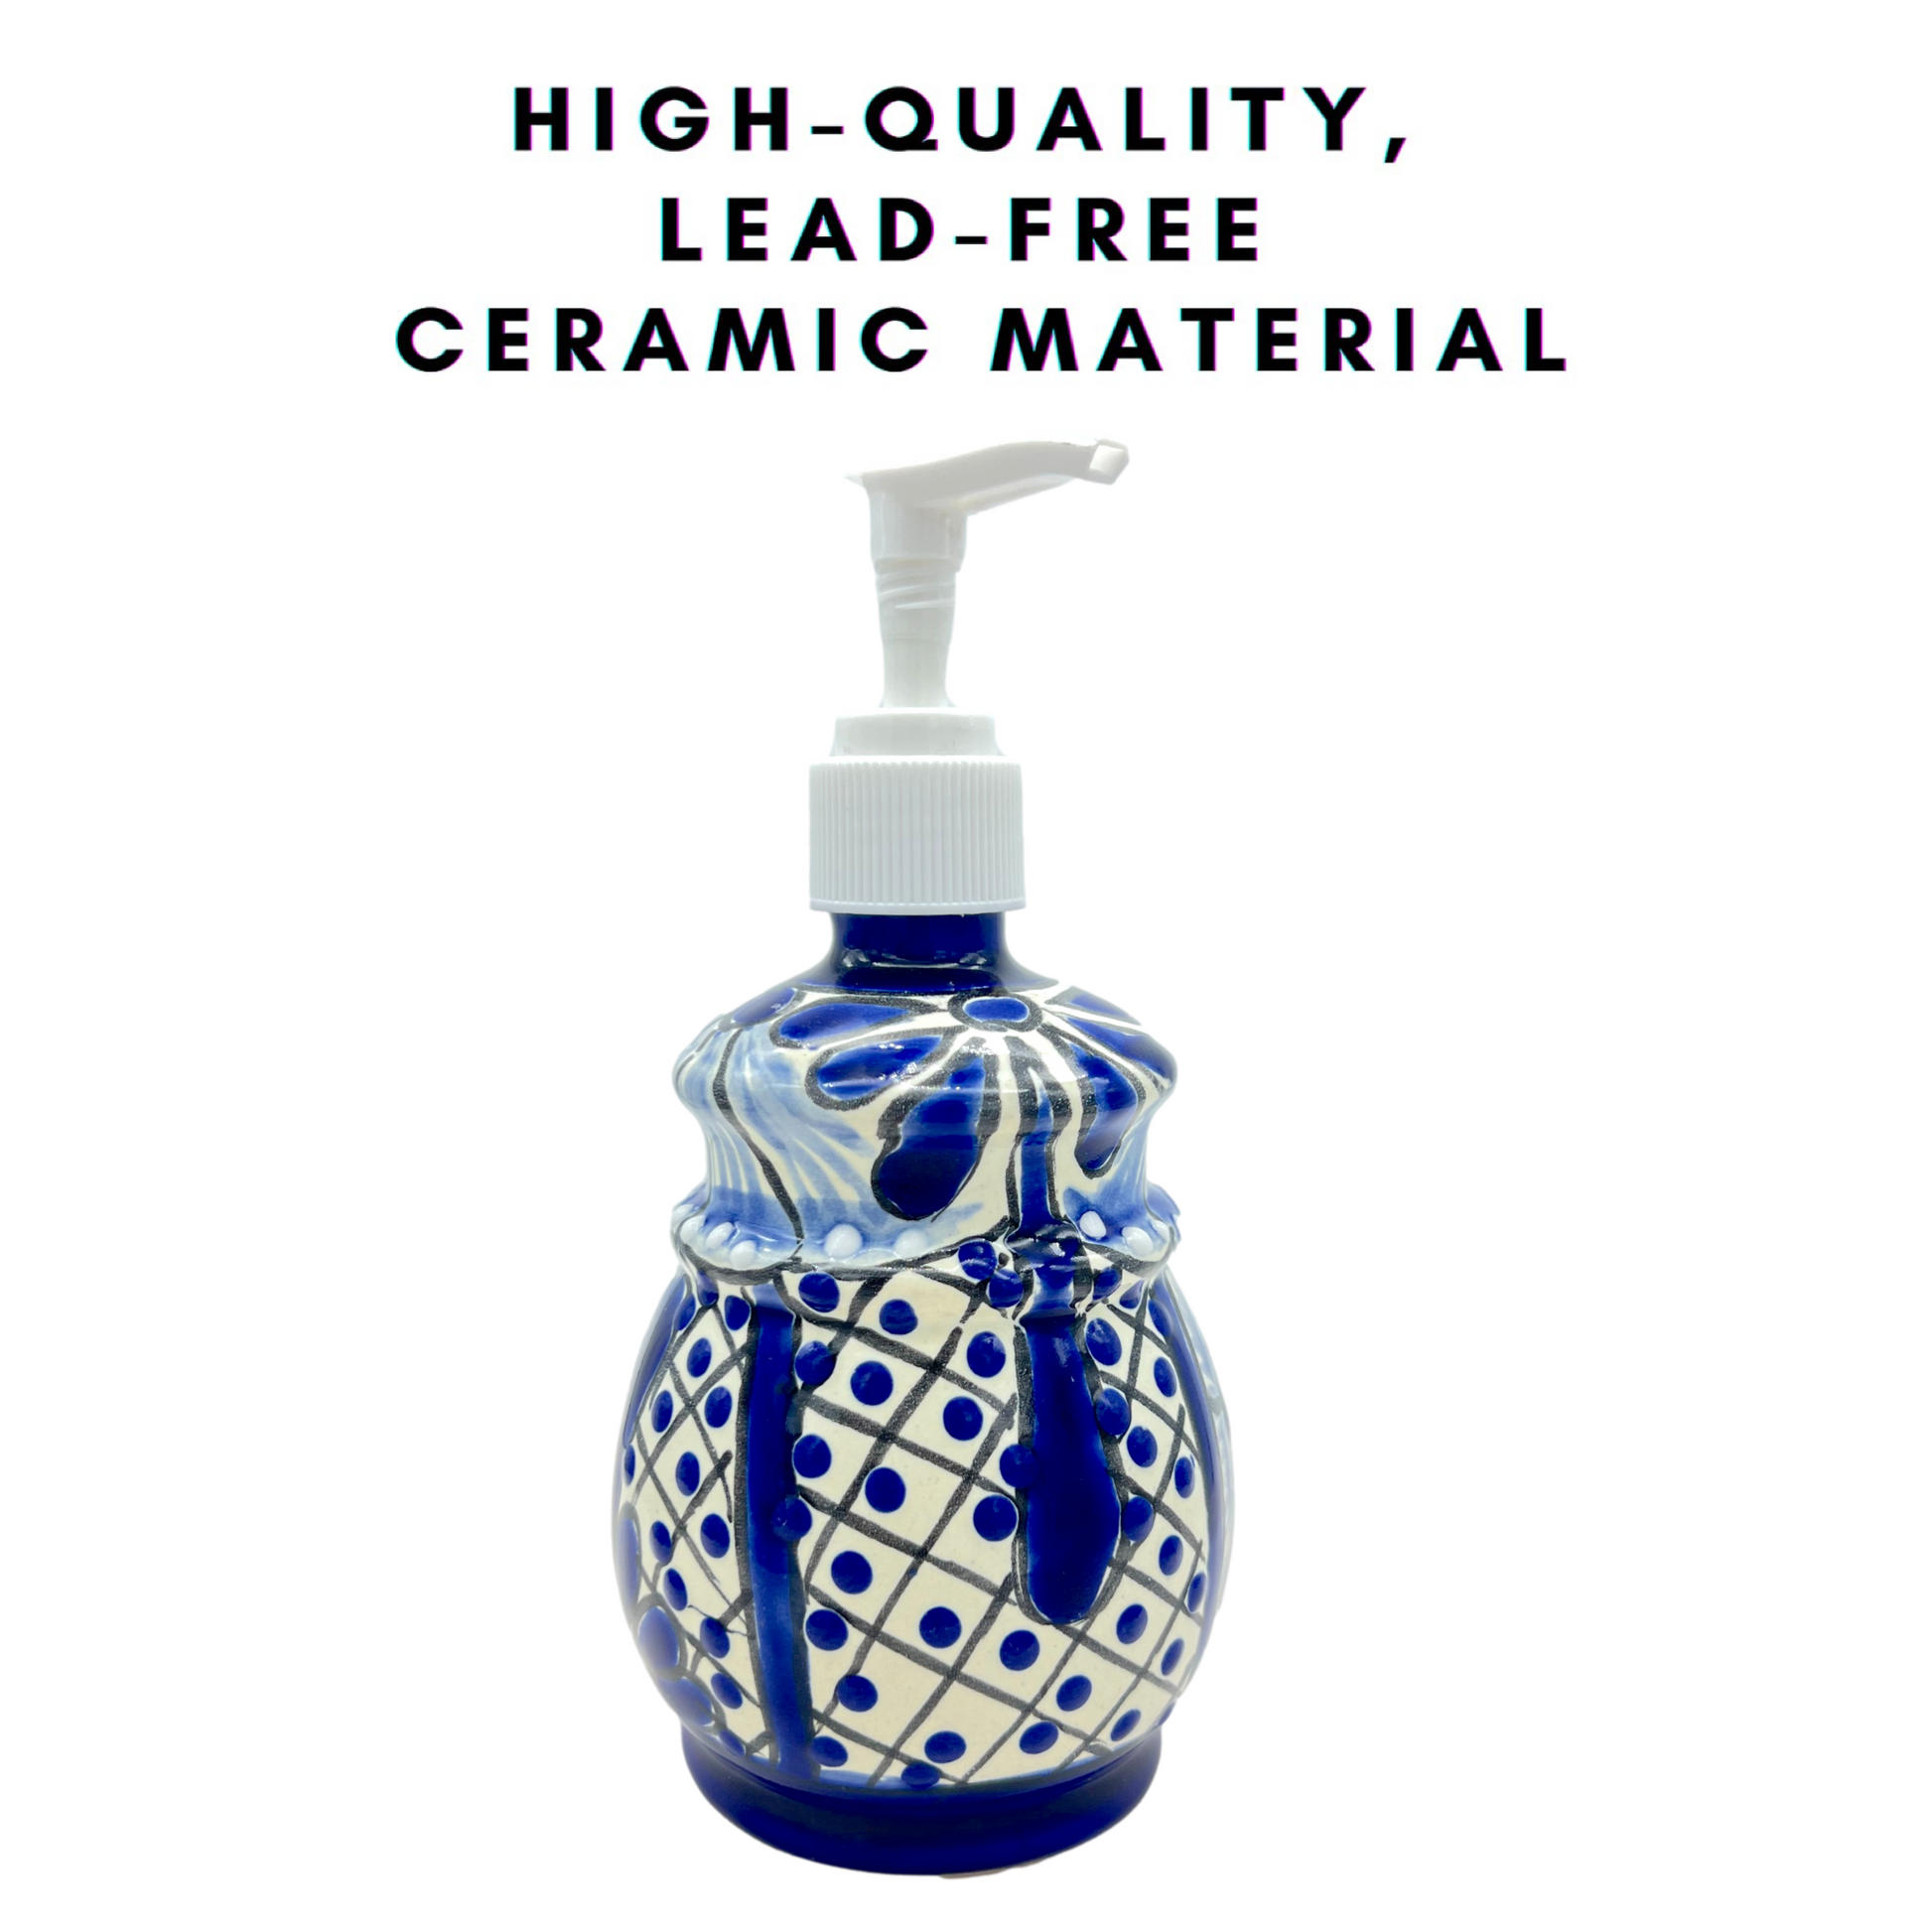 Hand-painted Talavera Ceramic Soap Dispenser in blue and white, a unique addition to kitchen or bathroom decor. high quality ceramic material